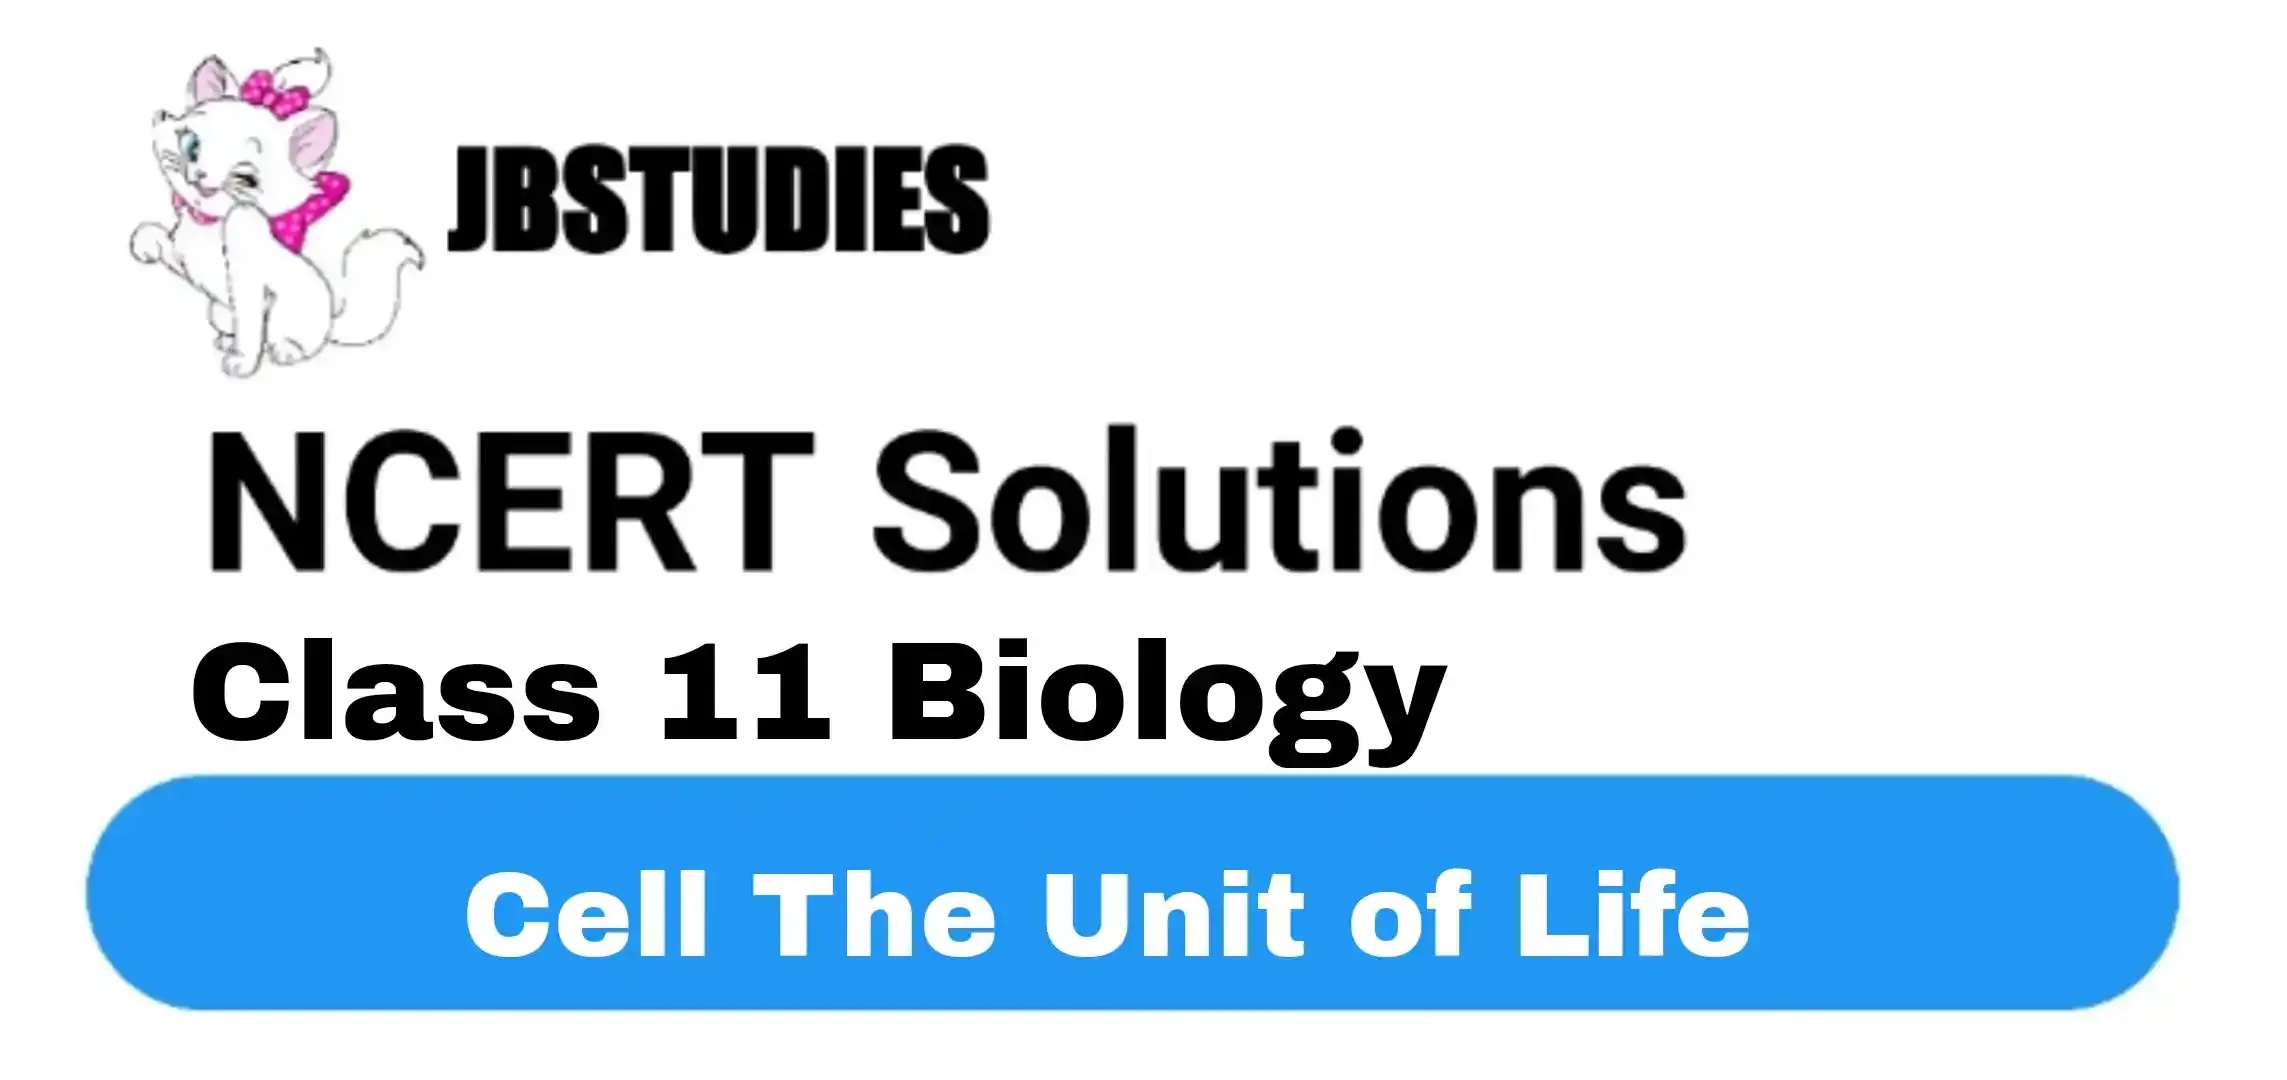 Solutions Class 11 Biology Chapter -8 (Cell The Unit of Life)